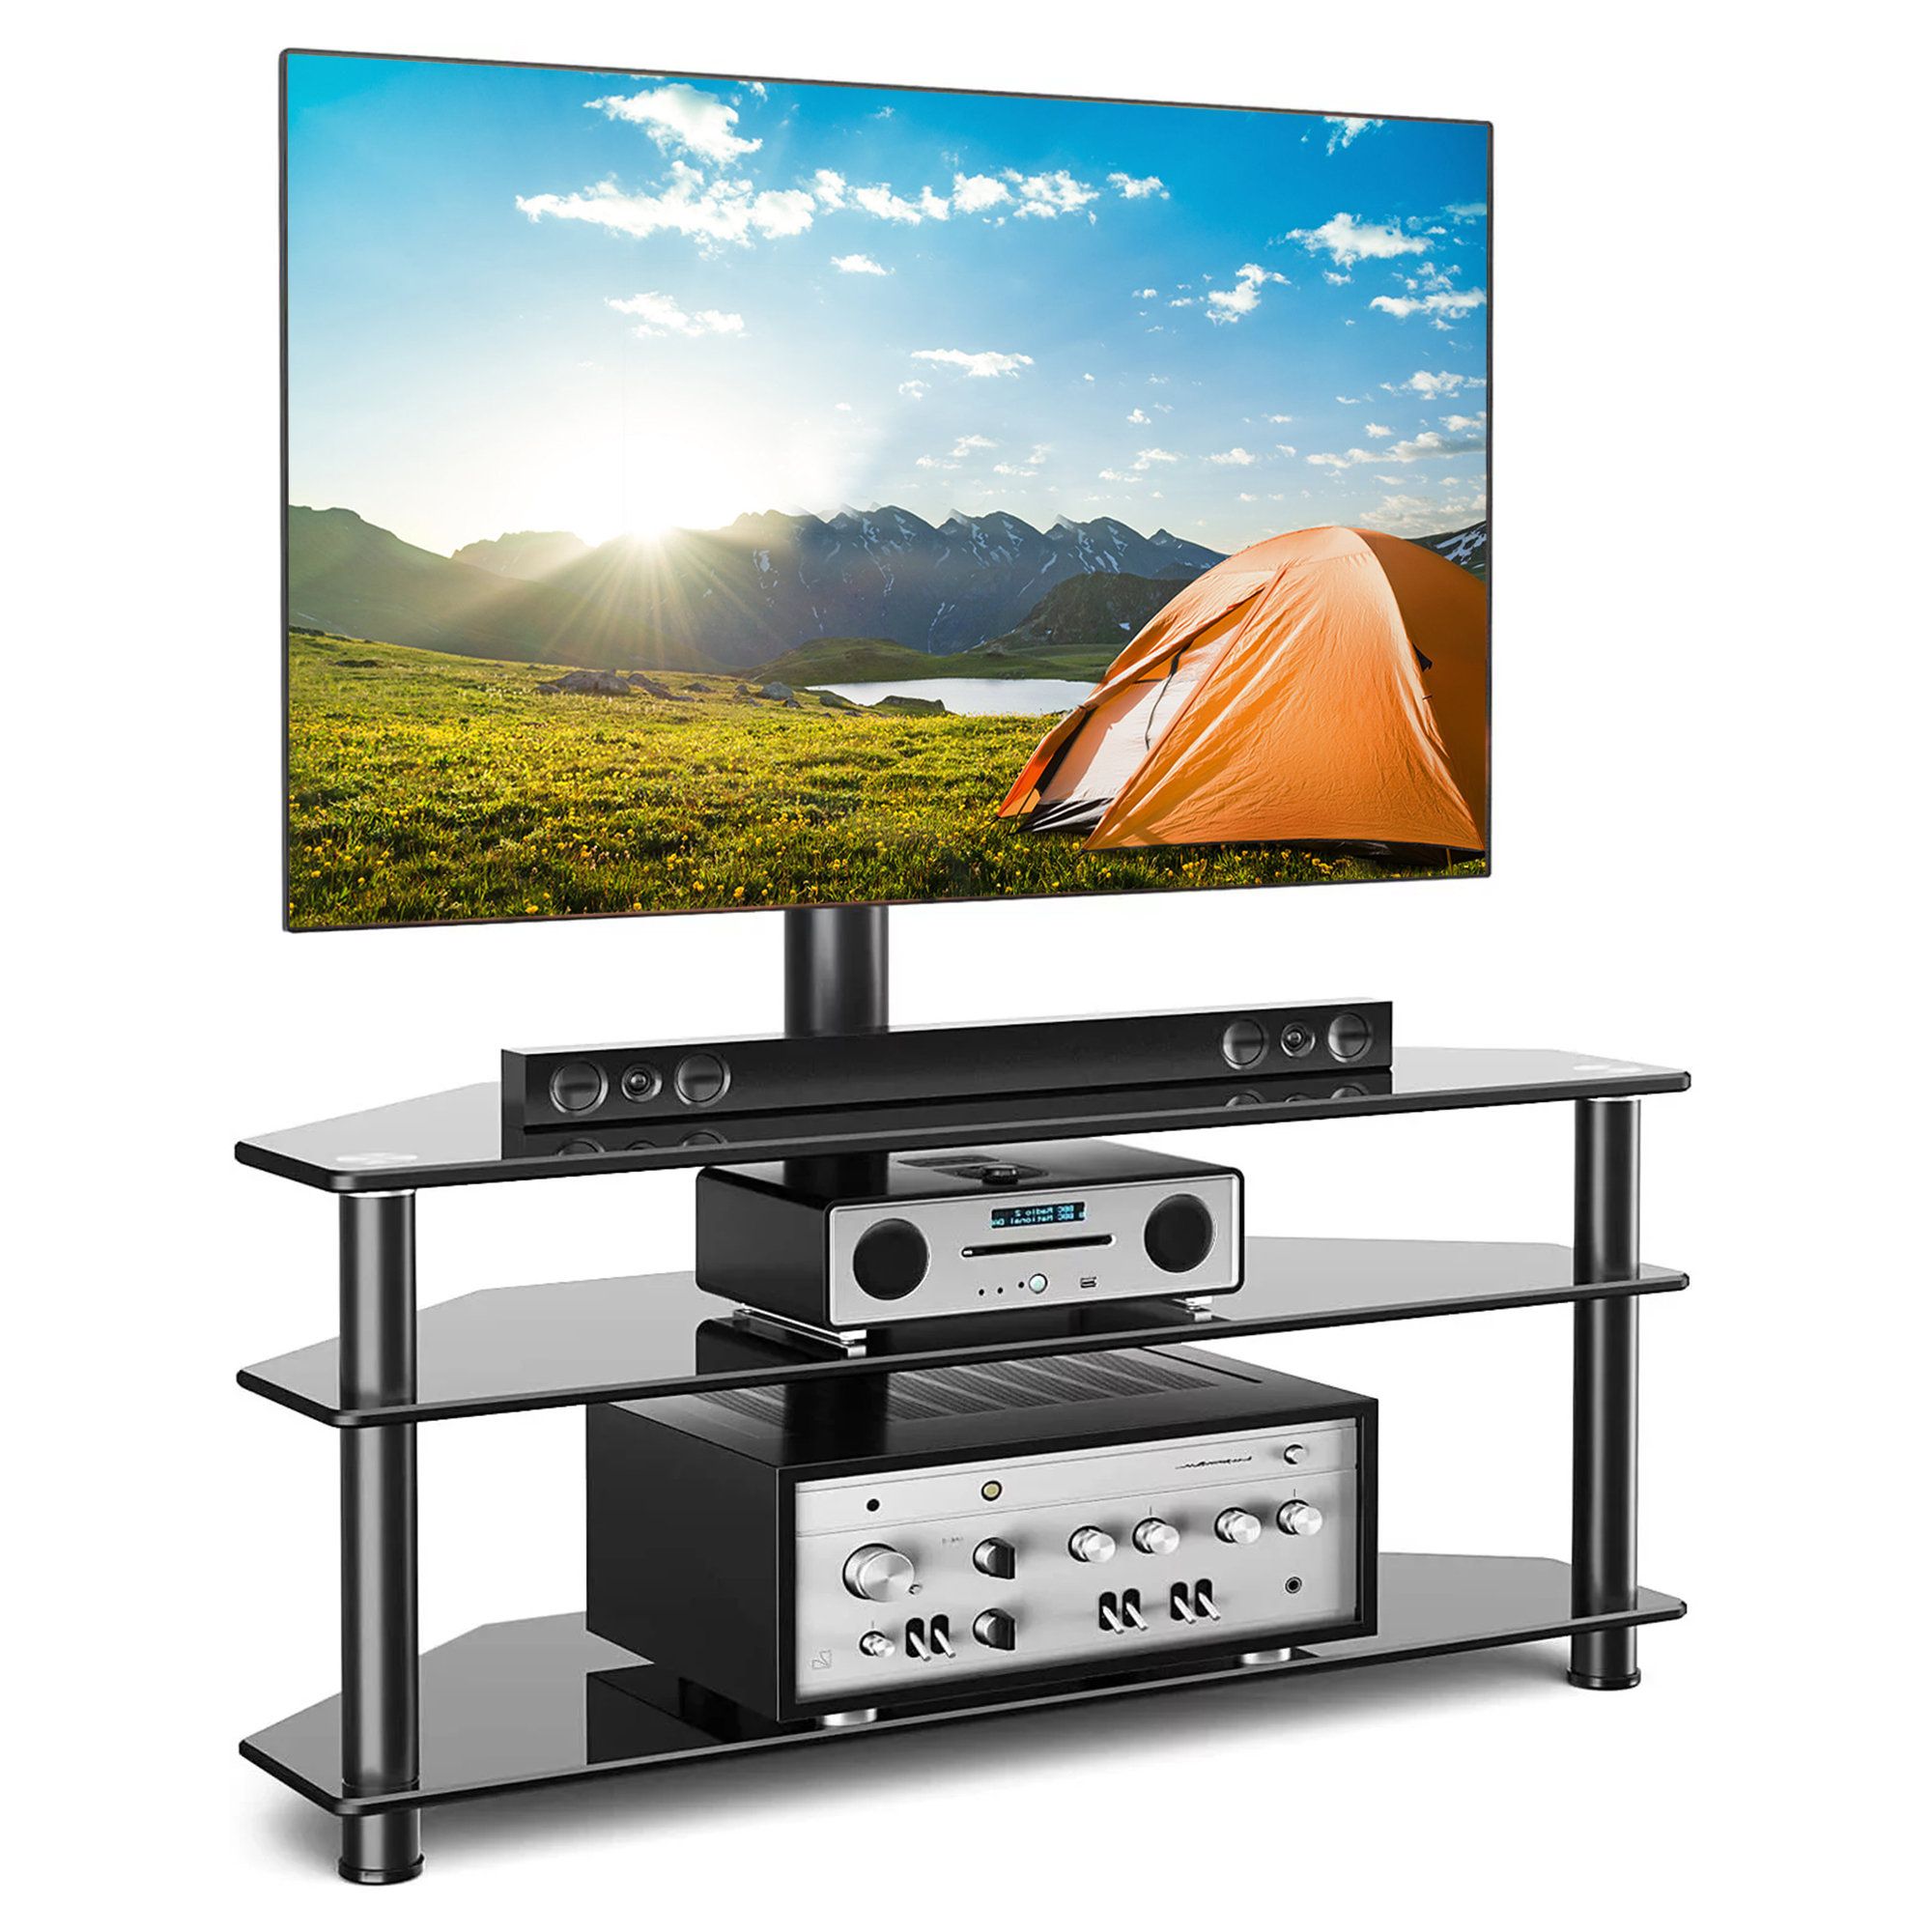 Symple Stuff Dmitrijus 3 Tier Multi Function Tv Stand For 32 65 Inch Tvs |  Wayfair Within Tier Stands For Tvs (View 7 of 15)